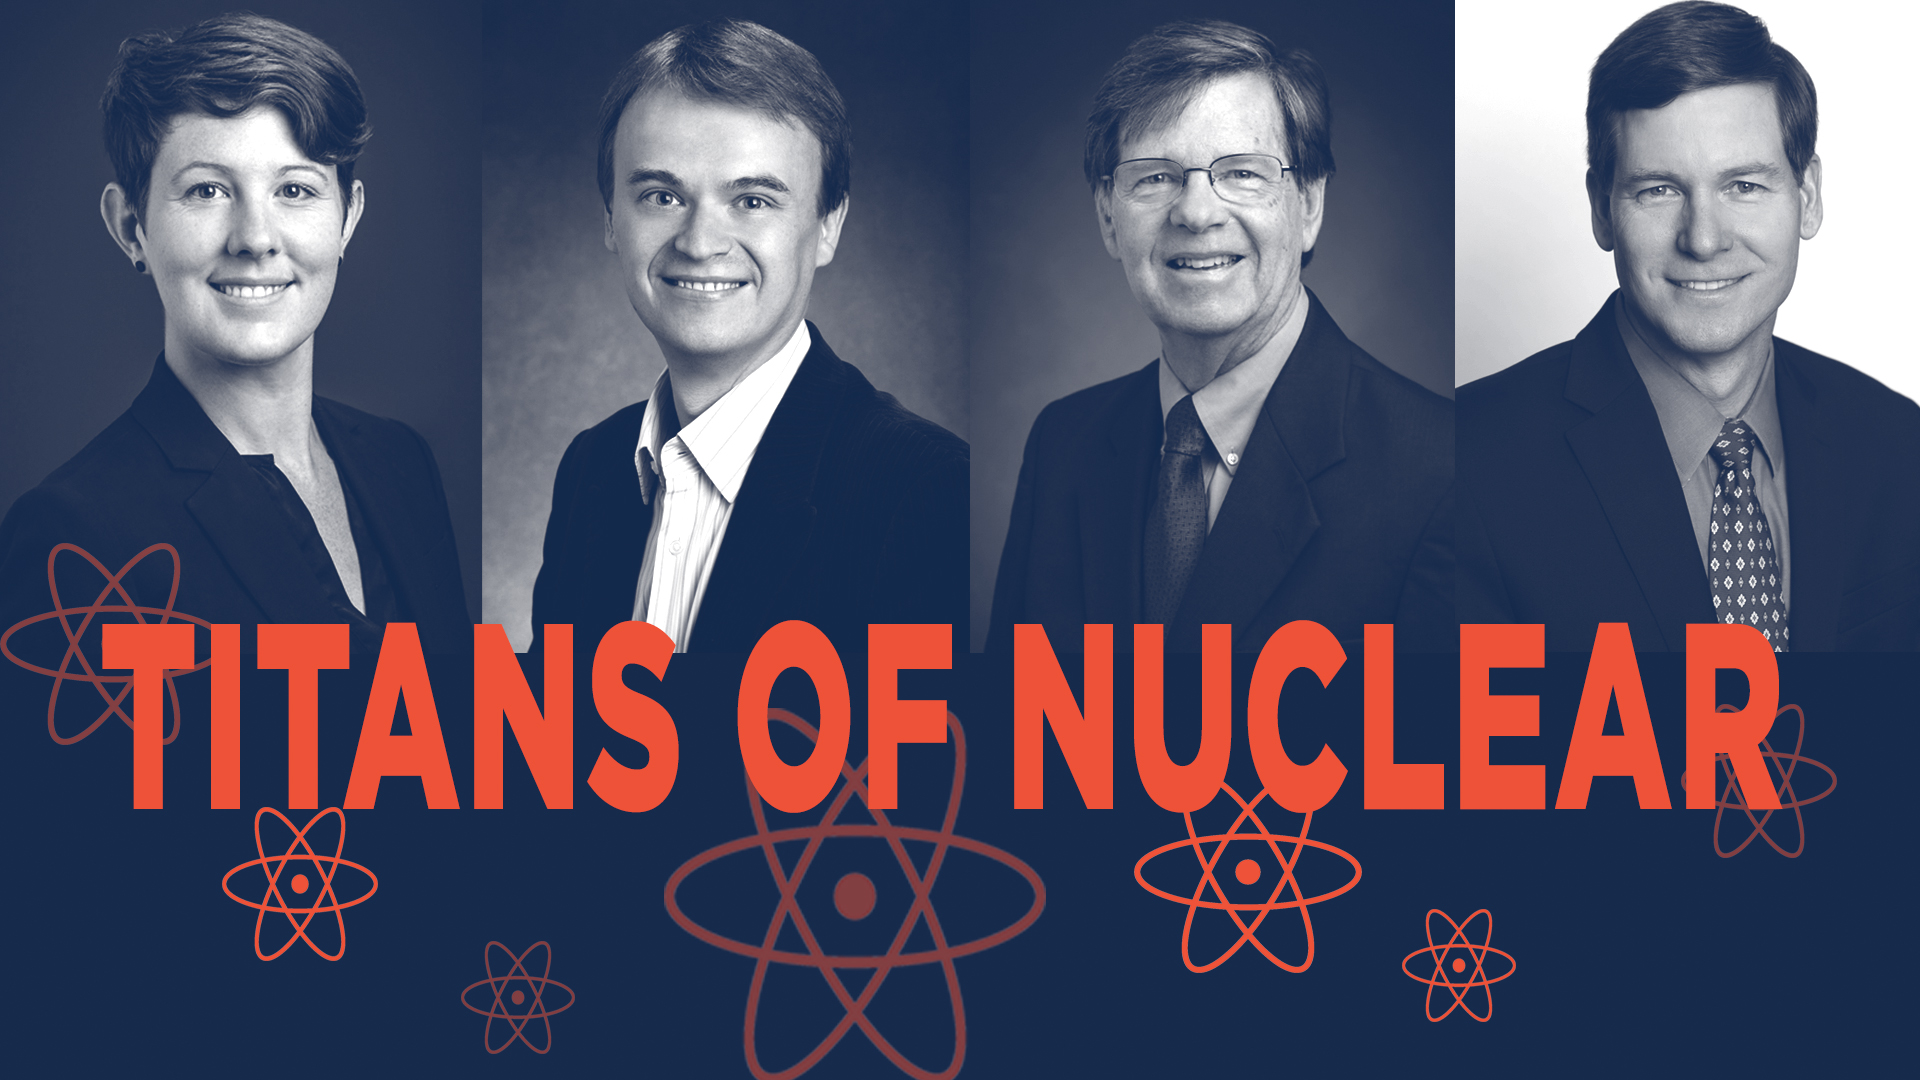 Titans of Nuclear podcast features NPRE faculty, alumnus, as experts